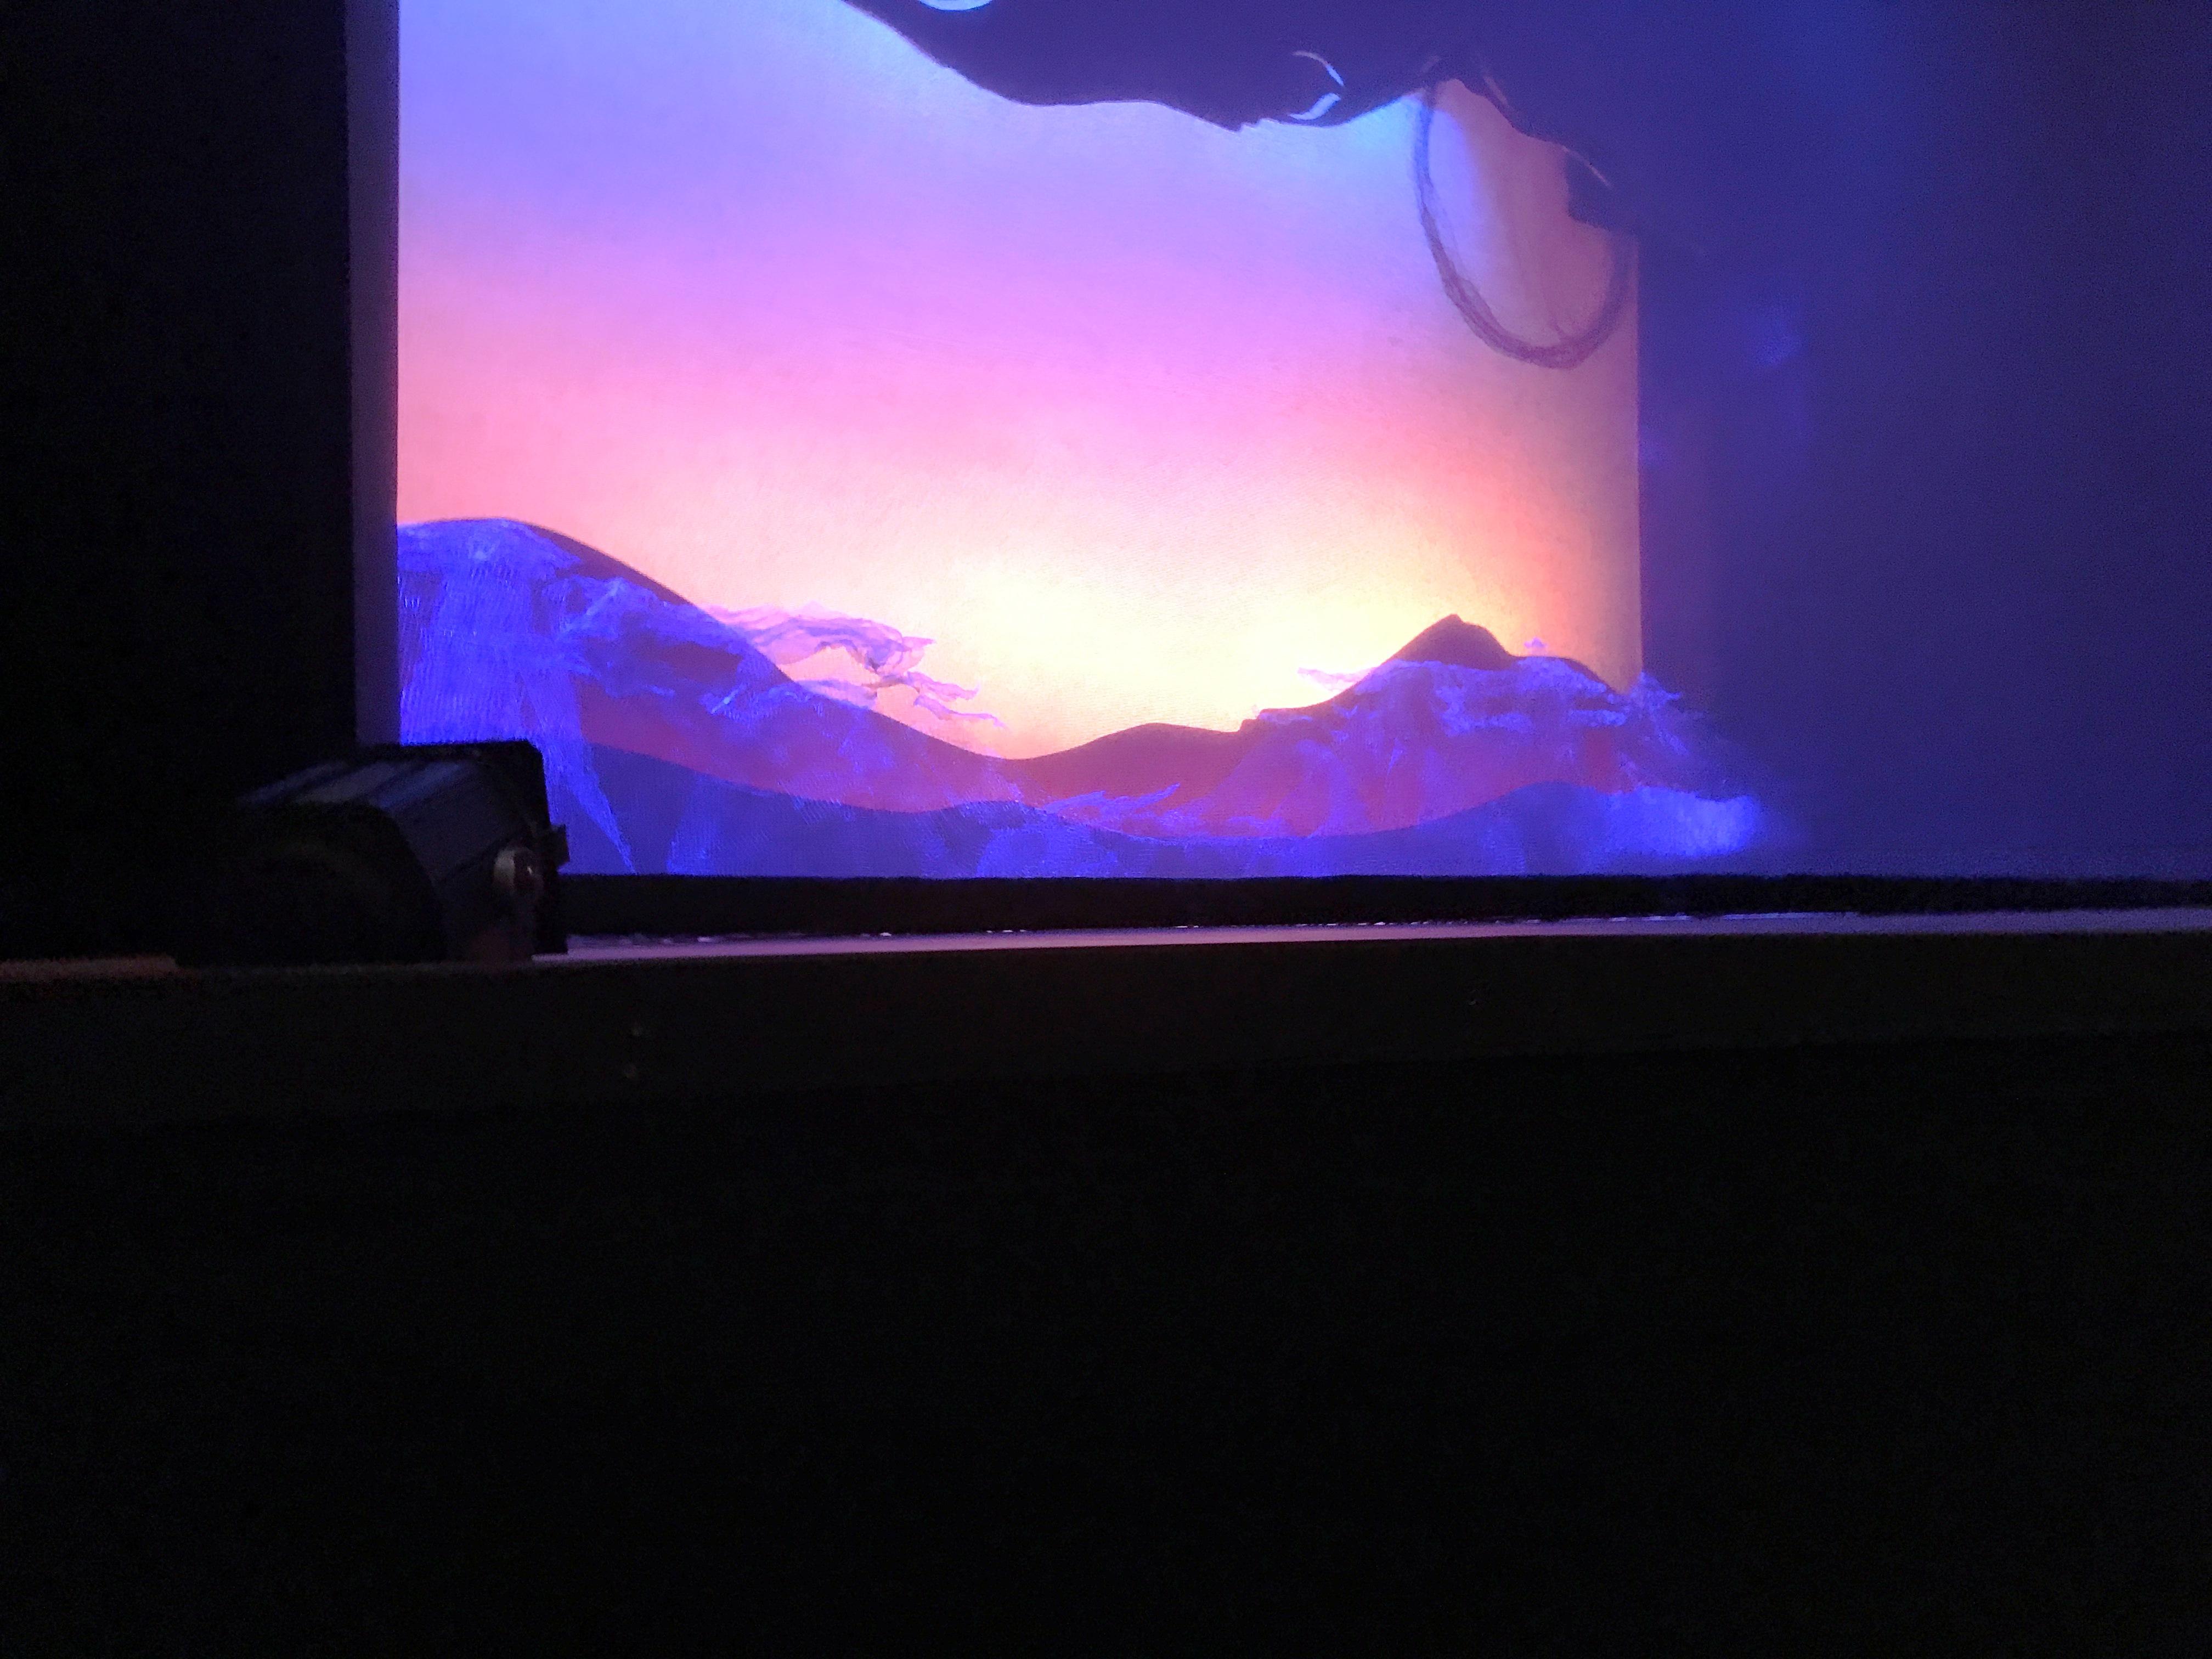 Stage during intermission - A silhouette of mountains against a sunset sky